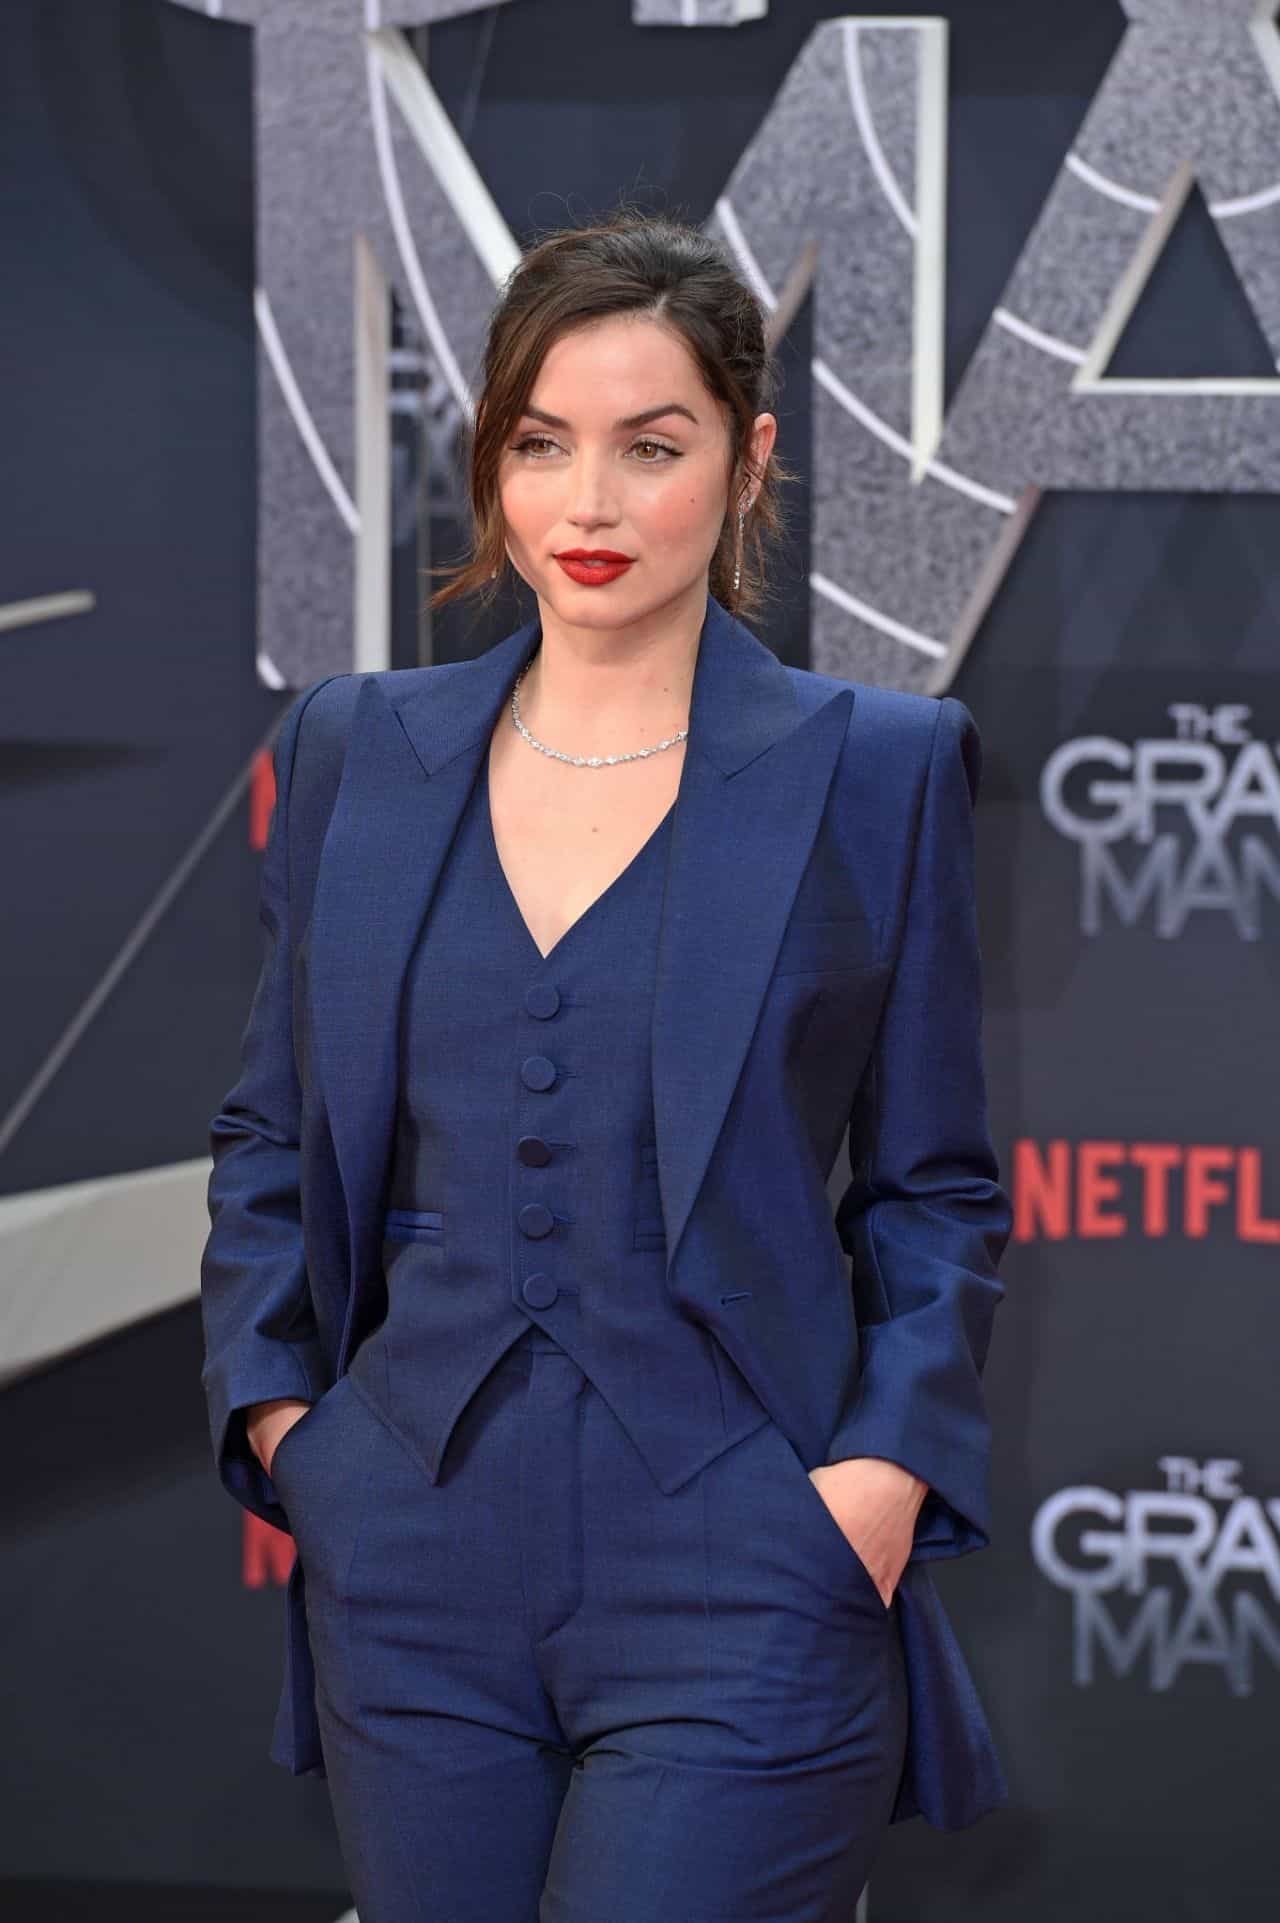 Ana de Armas Shows her CIA Look at "The Gray Man" Premiere in Berlin